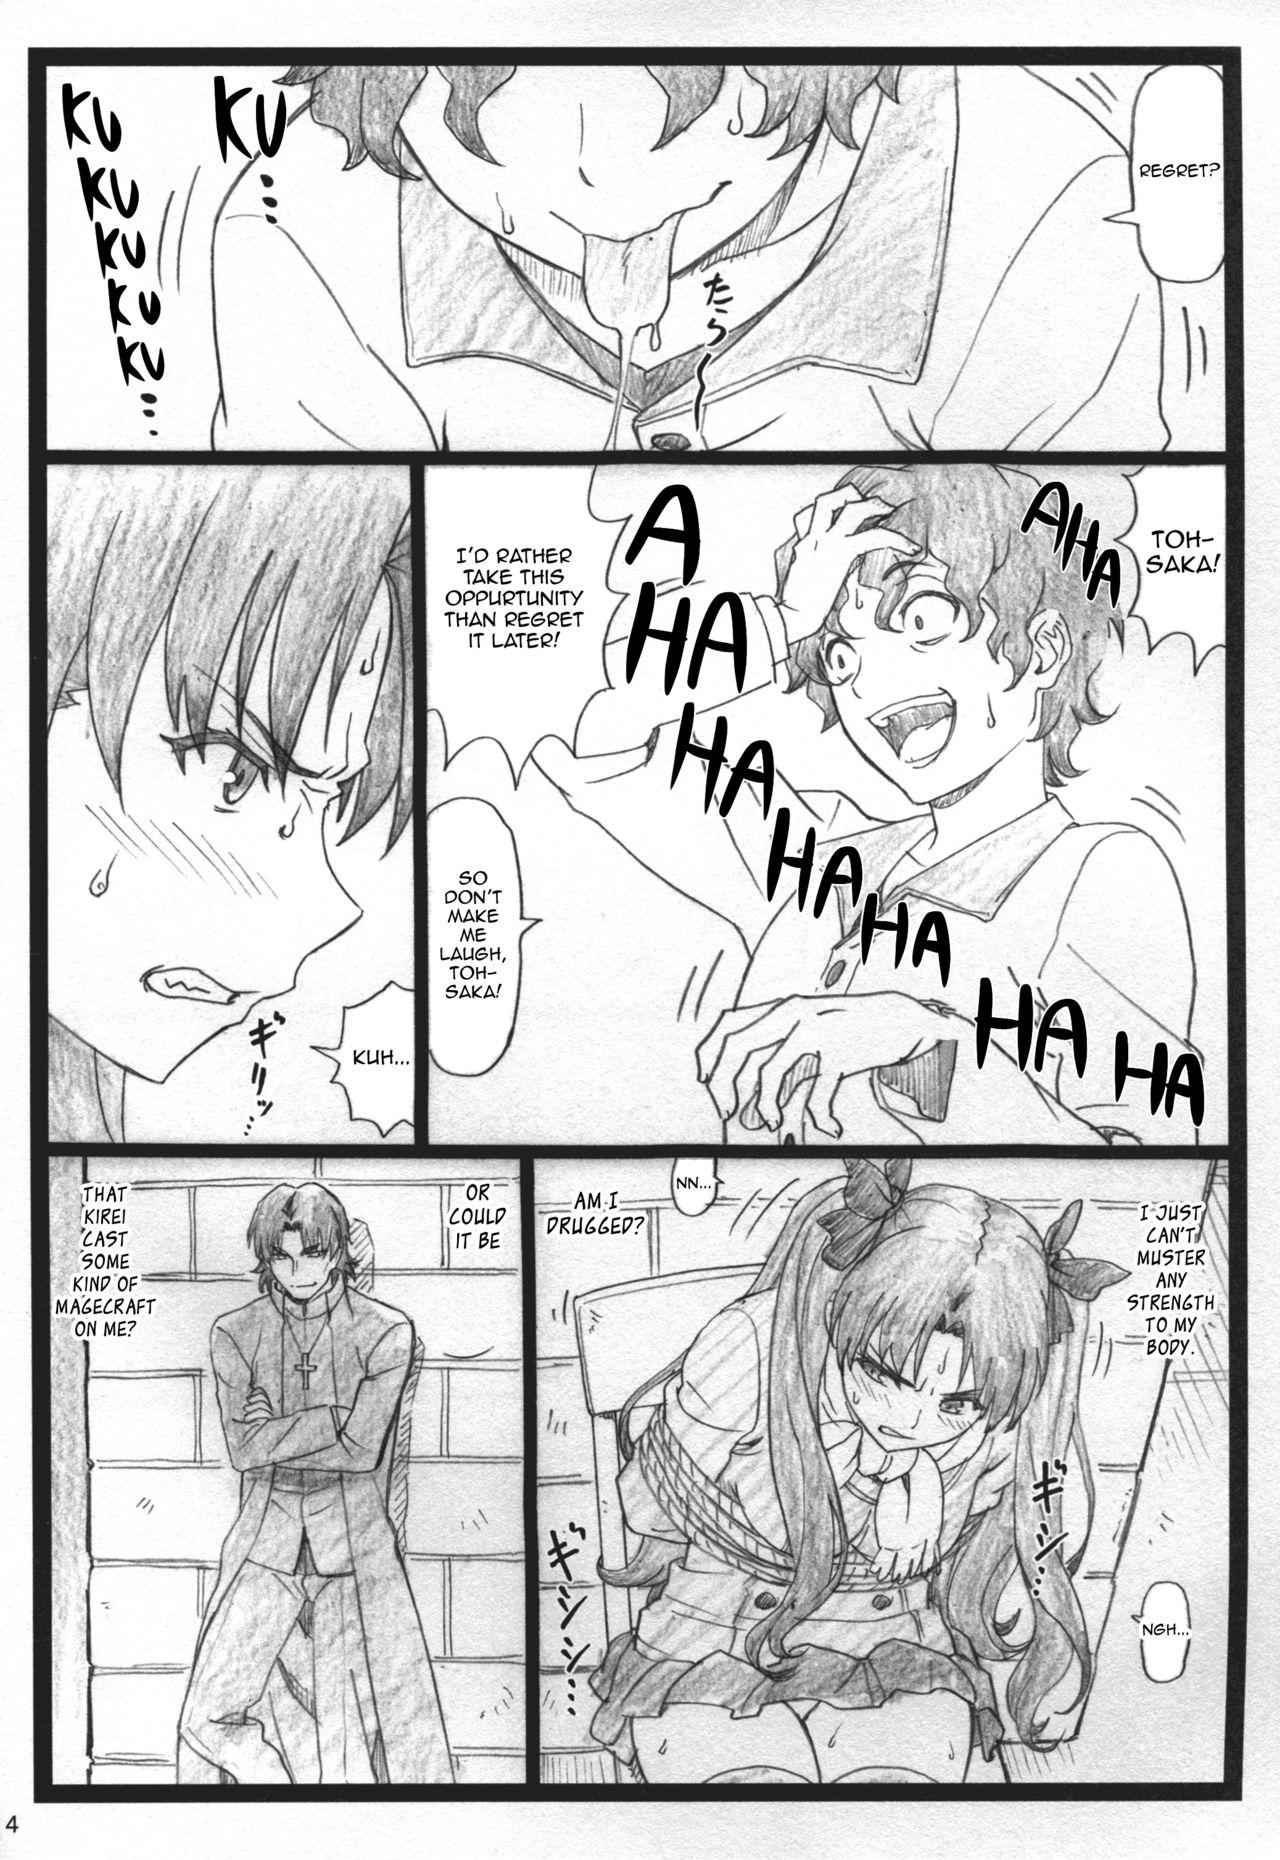 Pounded Rin to Shite... | With Rin... - Fate stay night Small Boobs - Page 4